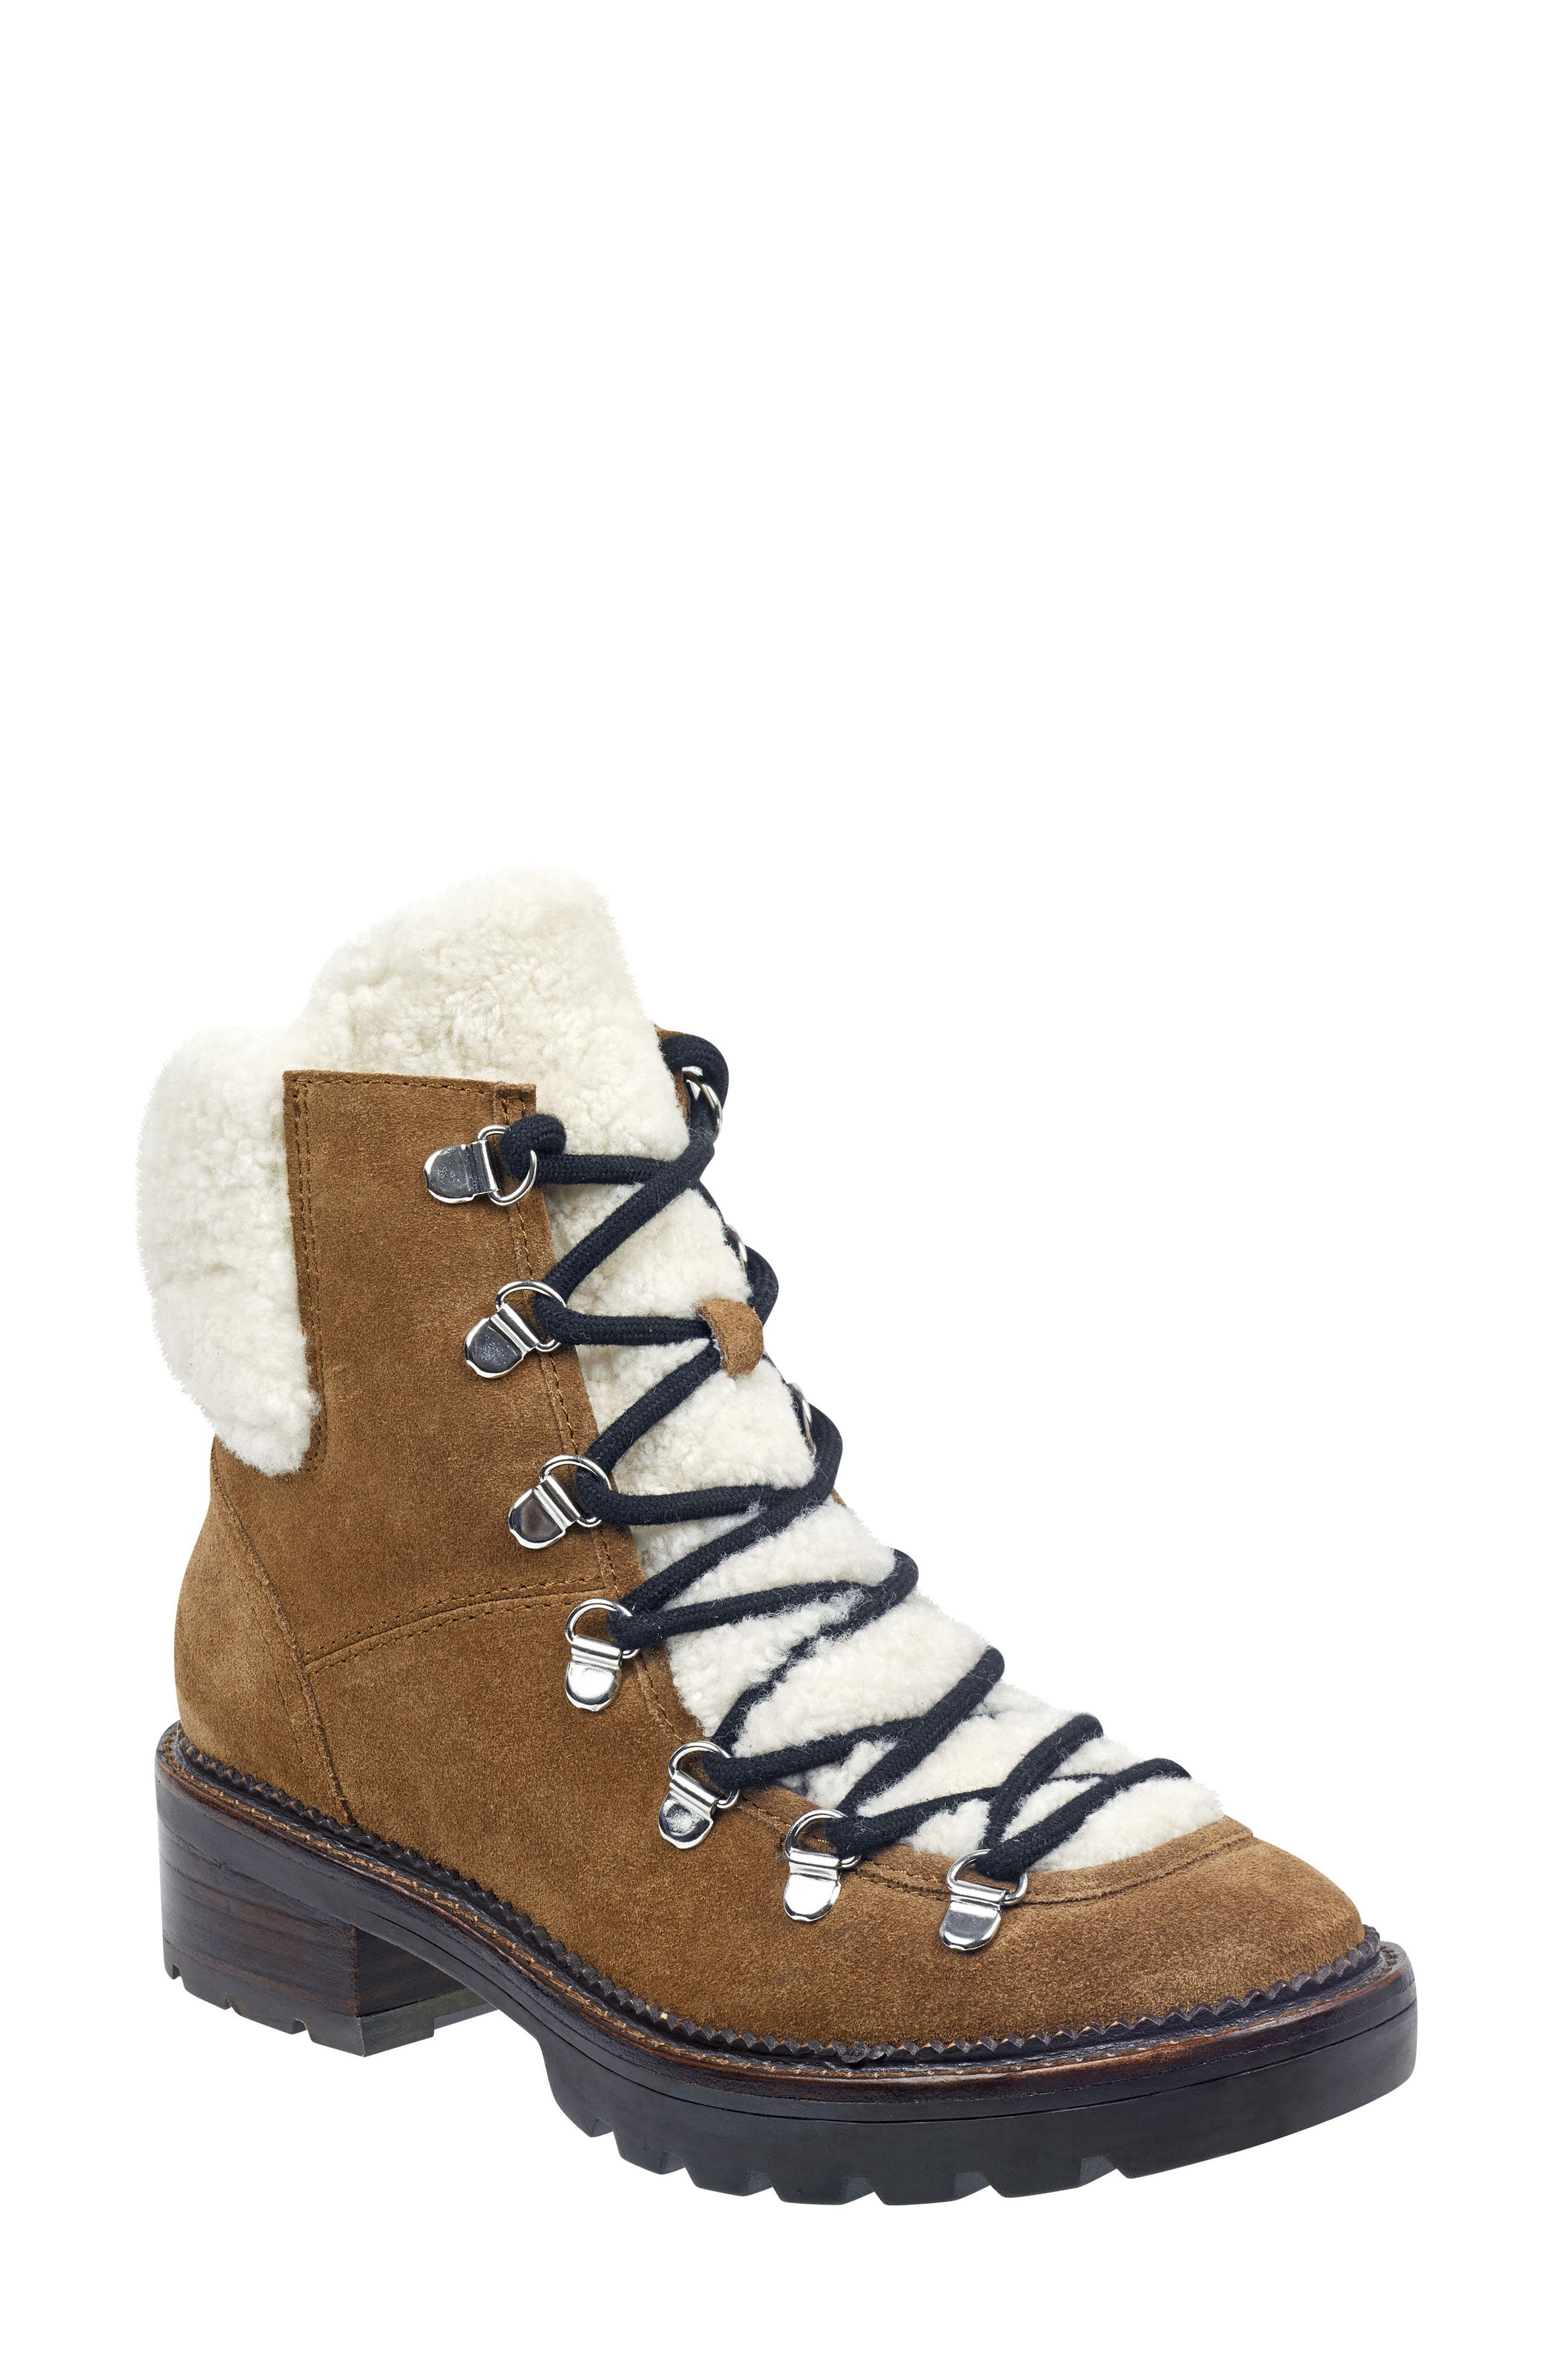 shearling lace up boots